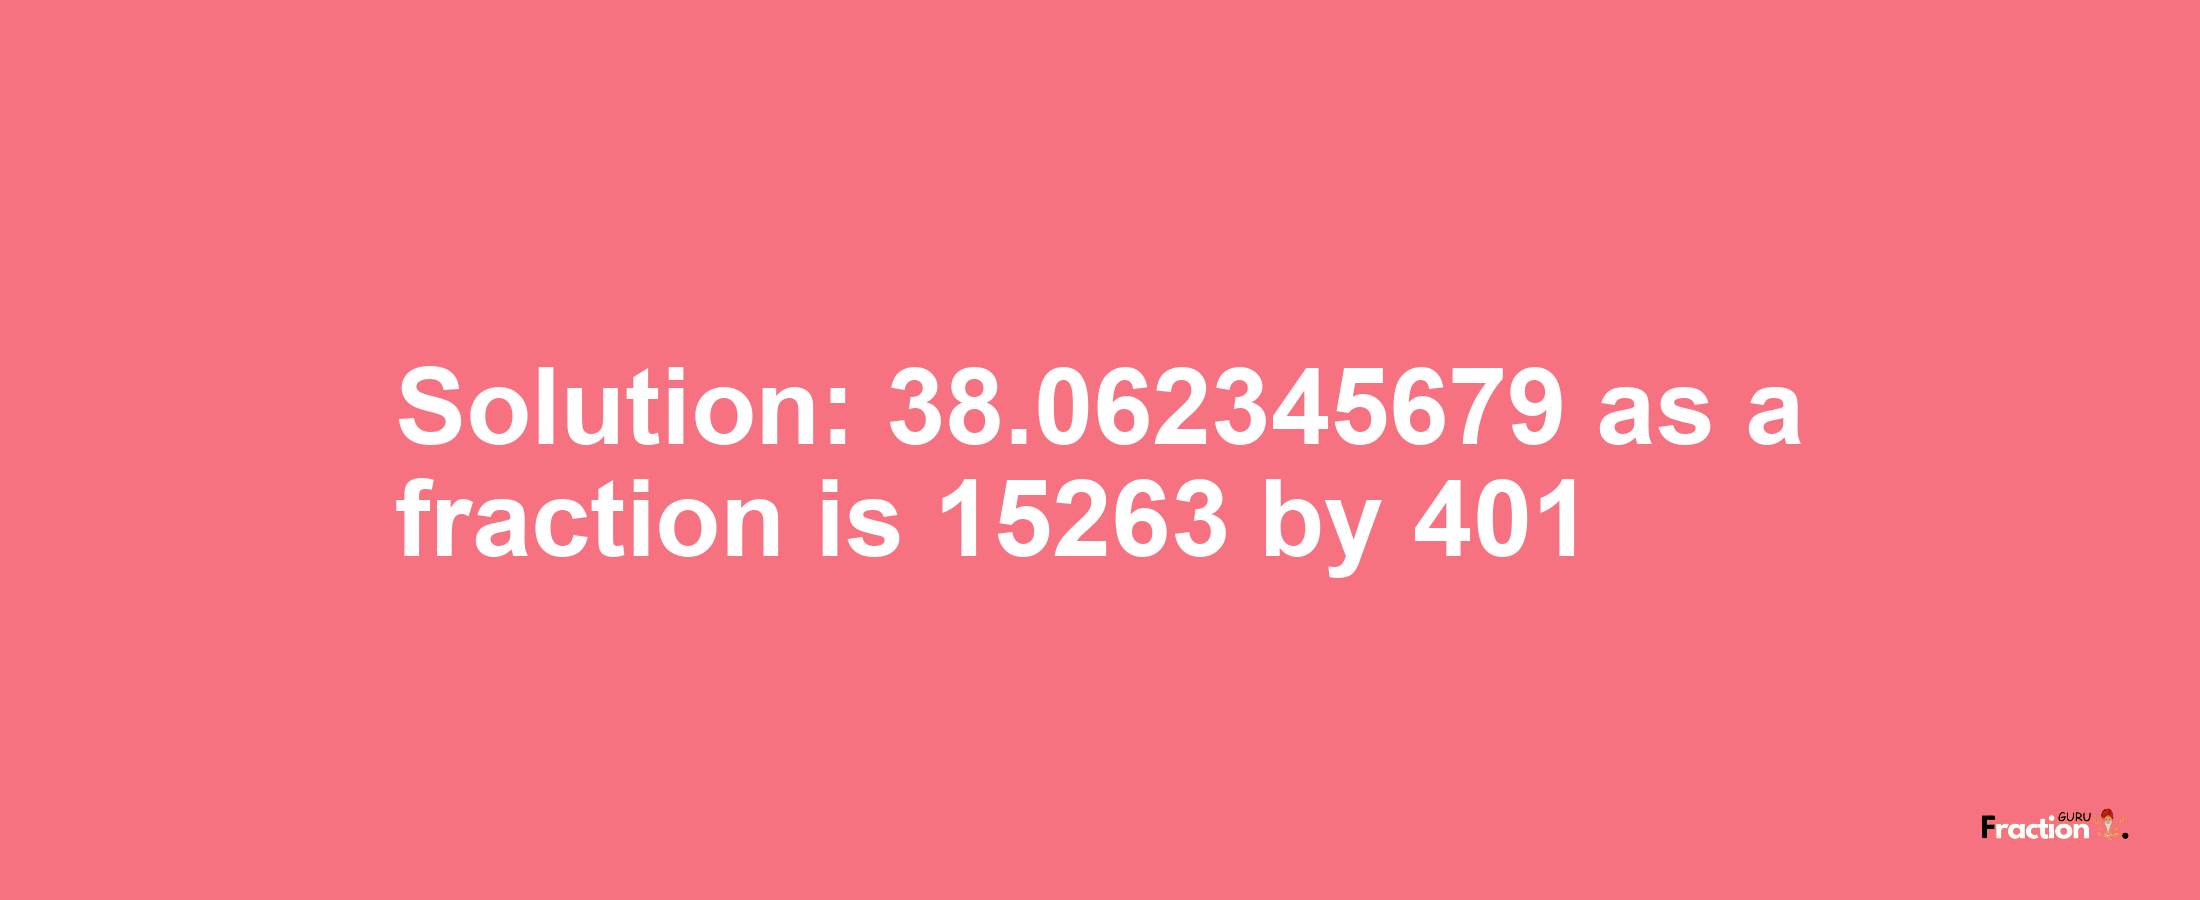 Solution:38.062345679 as a fraction is 15263/401